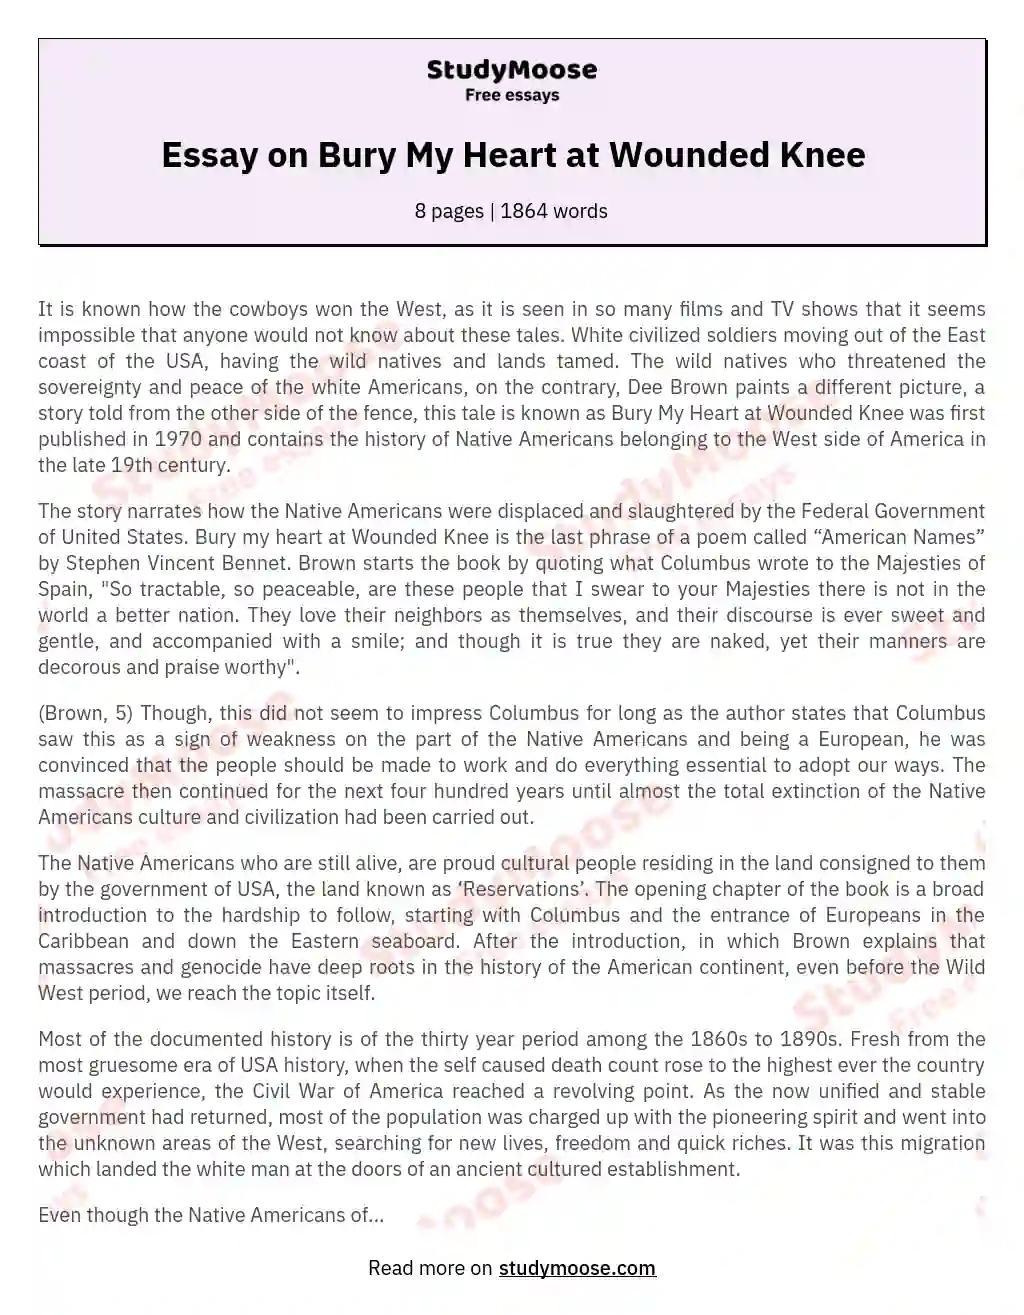 Essay on Bury My Heart at Wounded Knee